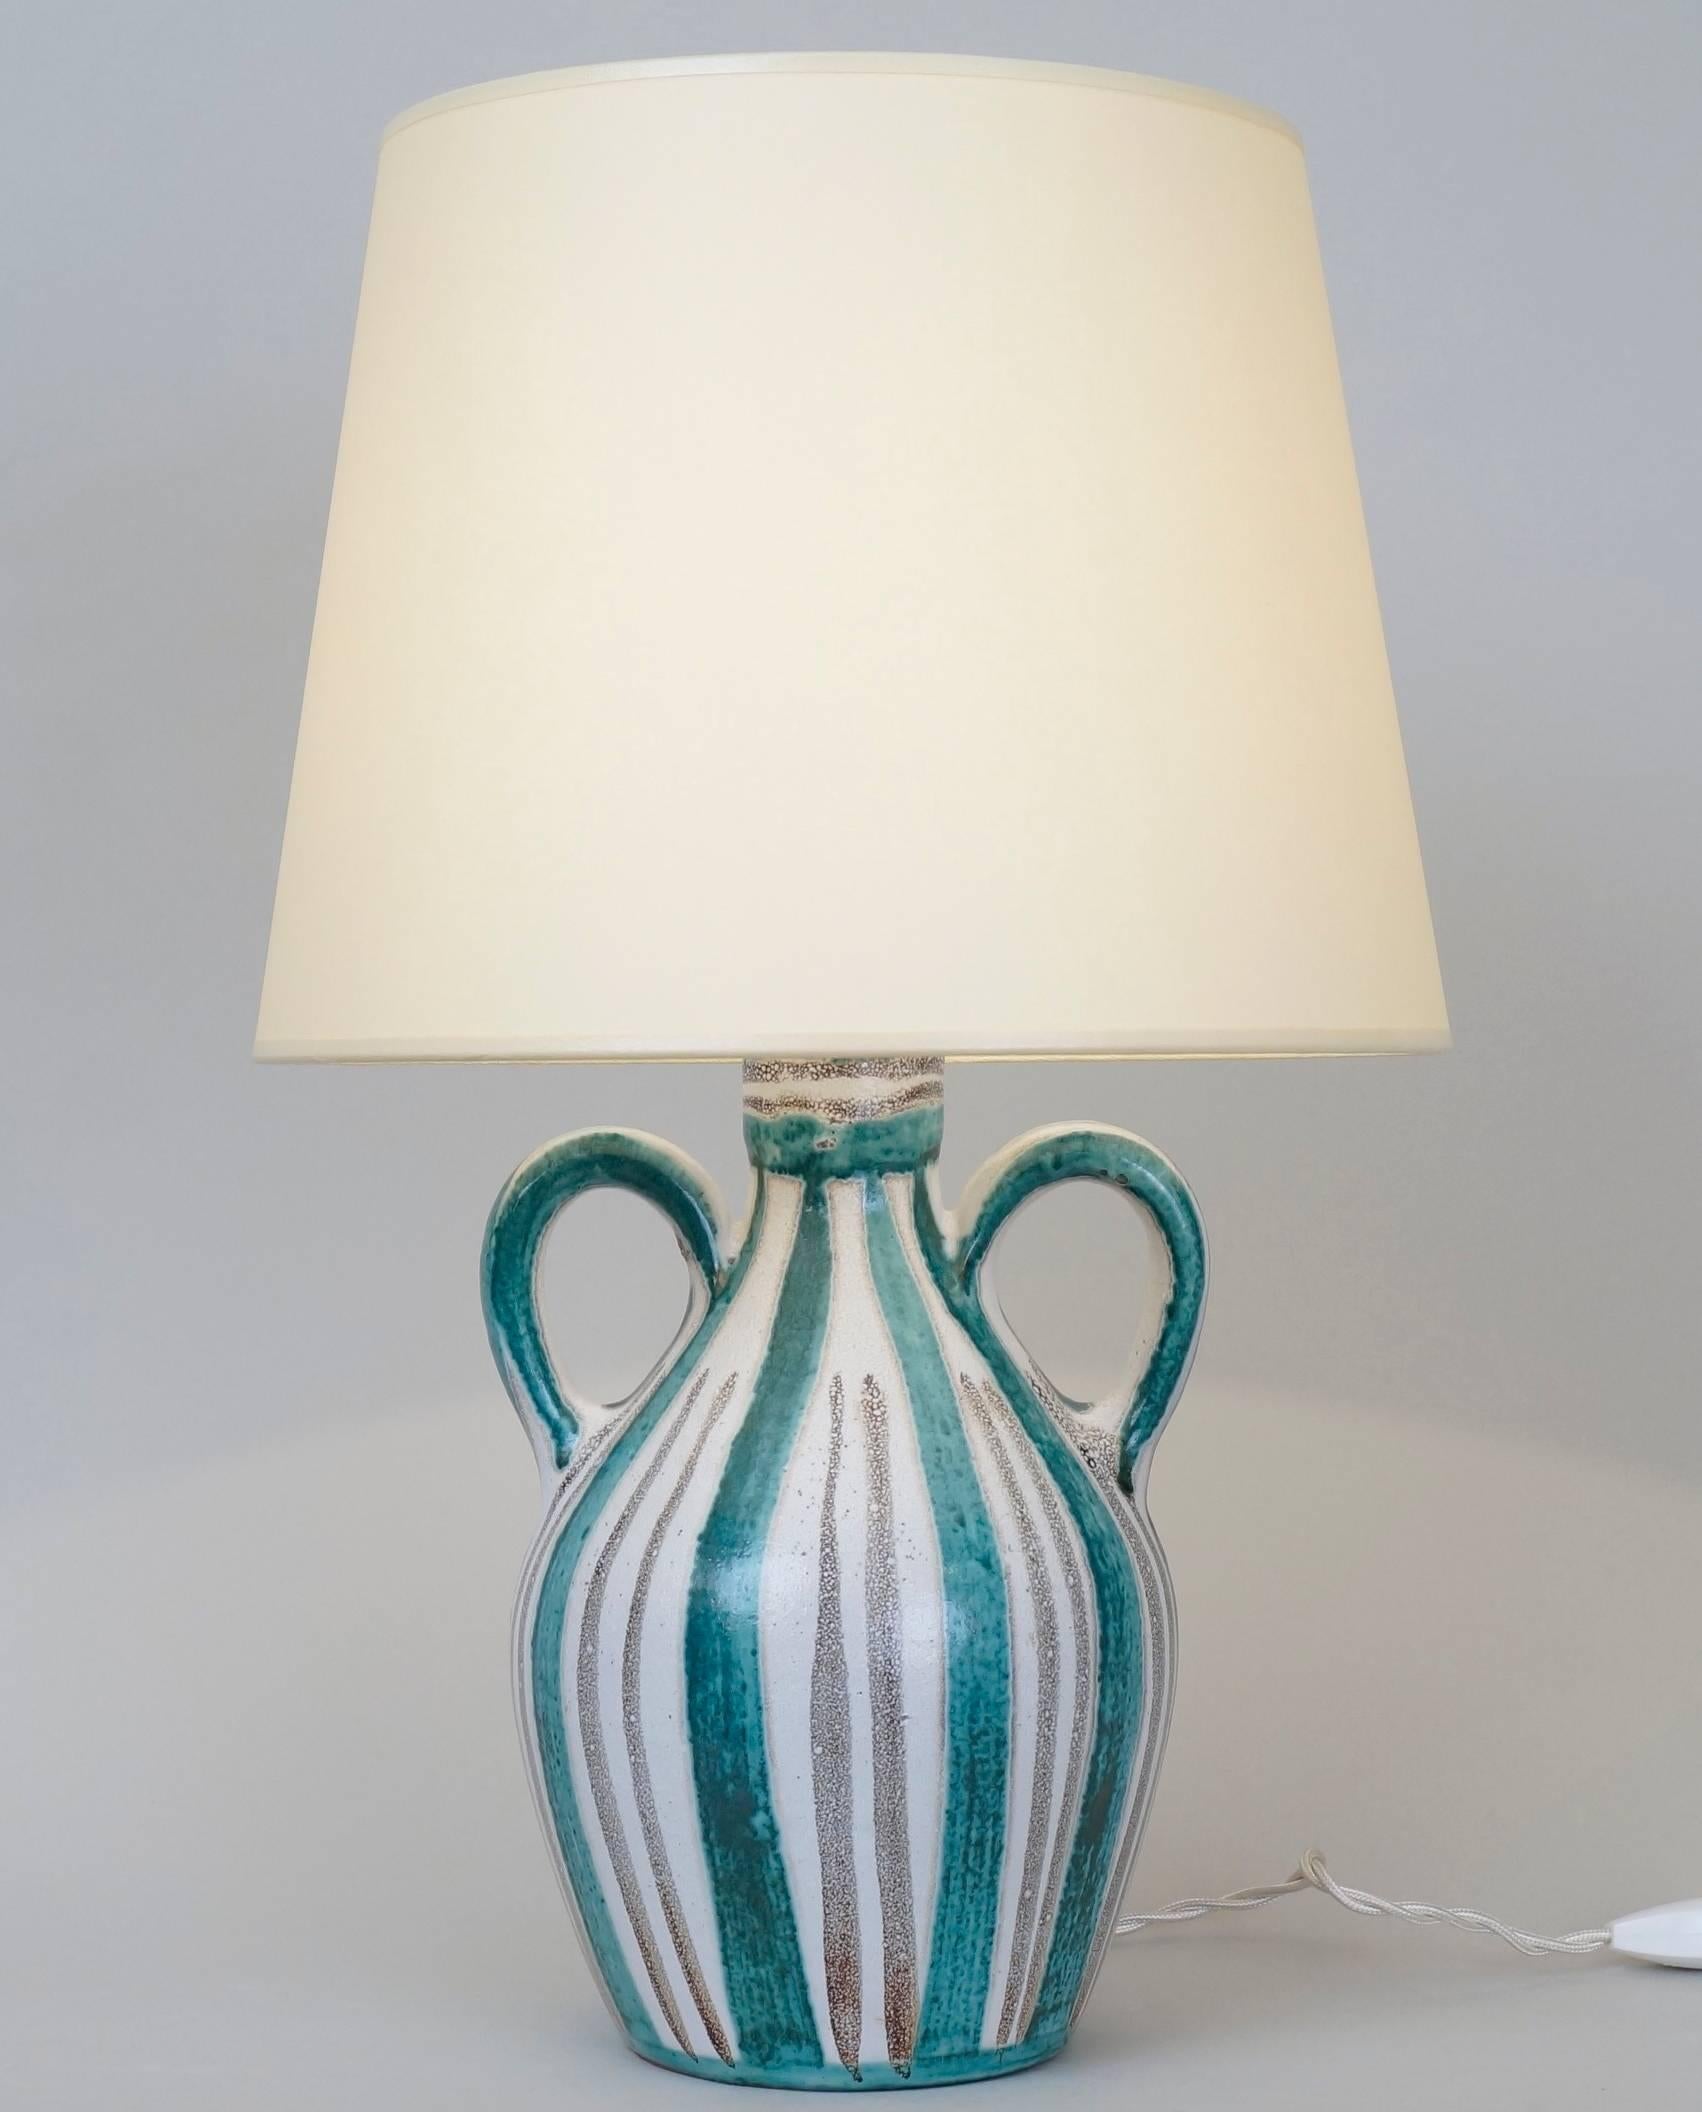 Ceramic table lamp by Robert Picault (1919-2000) Vallauris.
Signed on the back.
Custom-made fabric lampshades.
Rewired with twisted silk cord.
US standard plug on request.
Ceramic height: 22 cm - 8.7 in.
Height with lampshade: 43 cm - 16.9